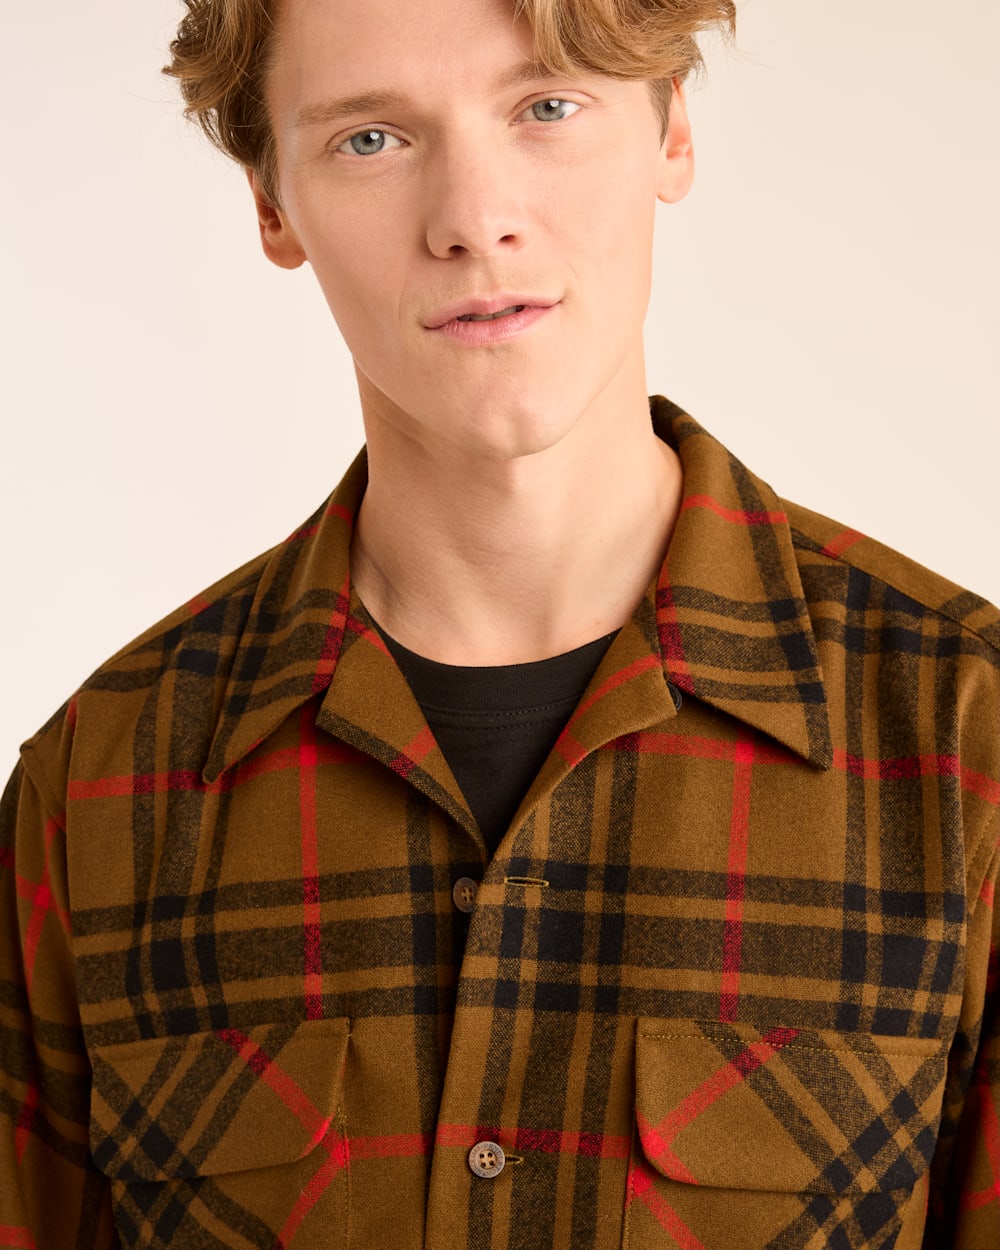 ALTERNATE VIEW OF MEN'S PLAID BOARD SHIRT IN BROWN/BLACK/RED image number 4